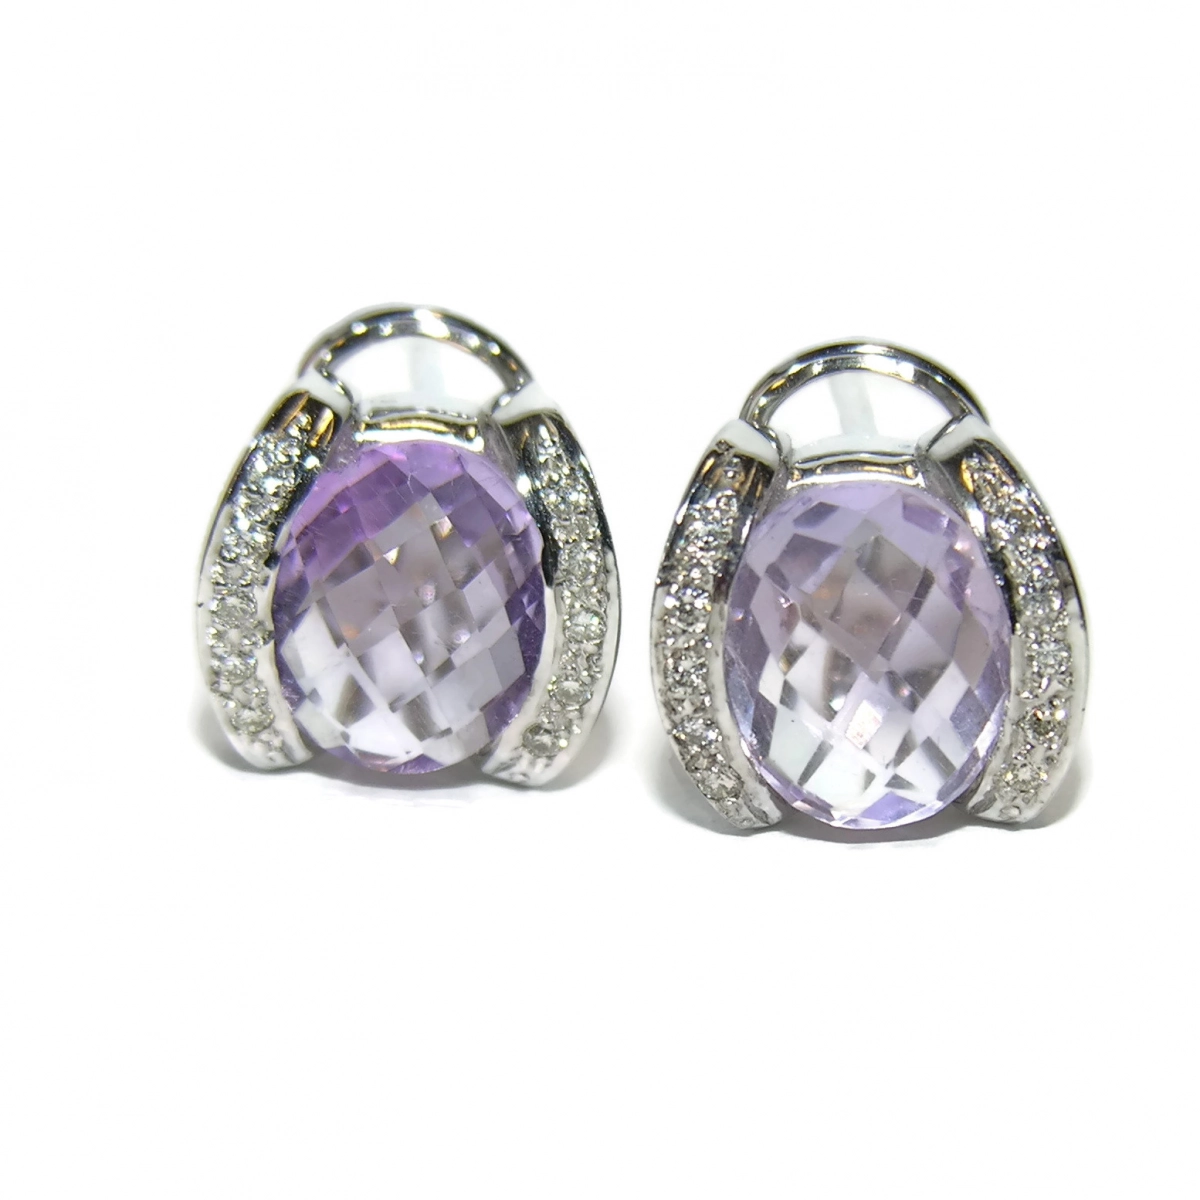 EARRINGS 0.20 CTS OF DIAMONDS AND AMETHYST WITH WHITE GOLD 18KTES. NEVER SAY NEVER